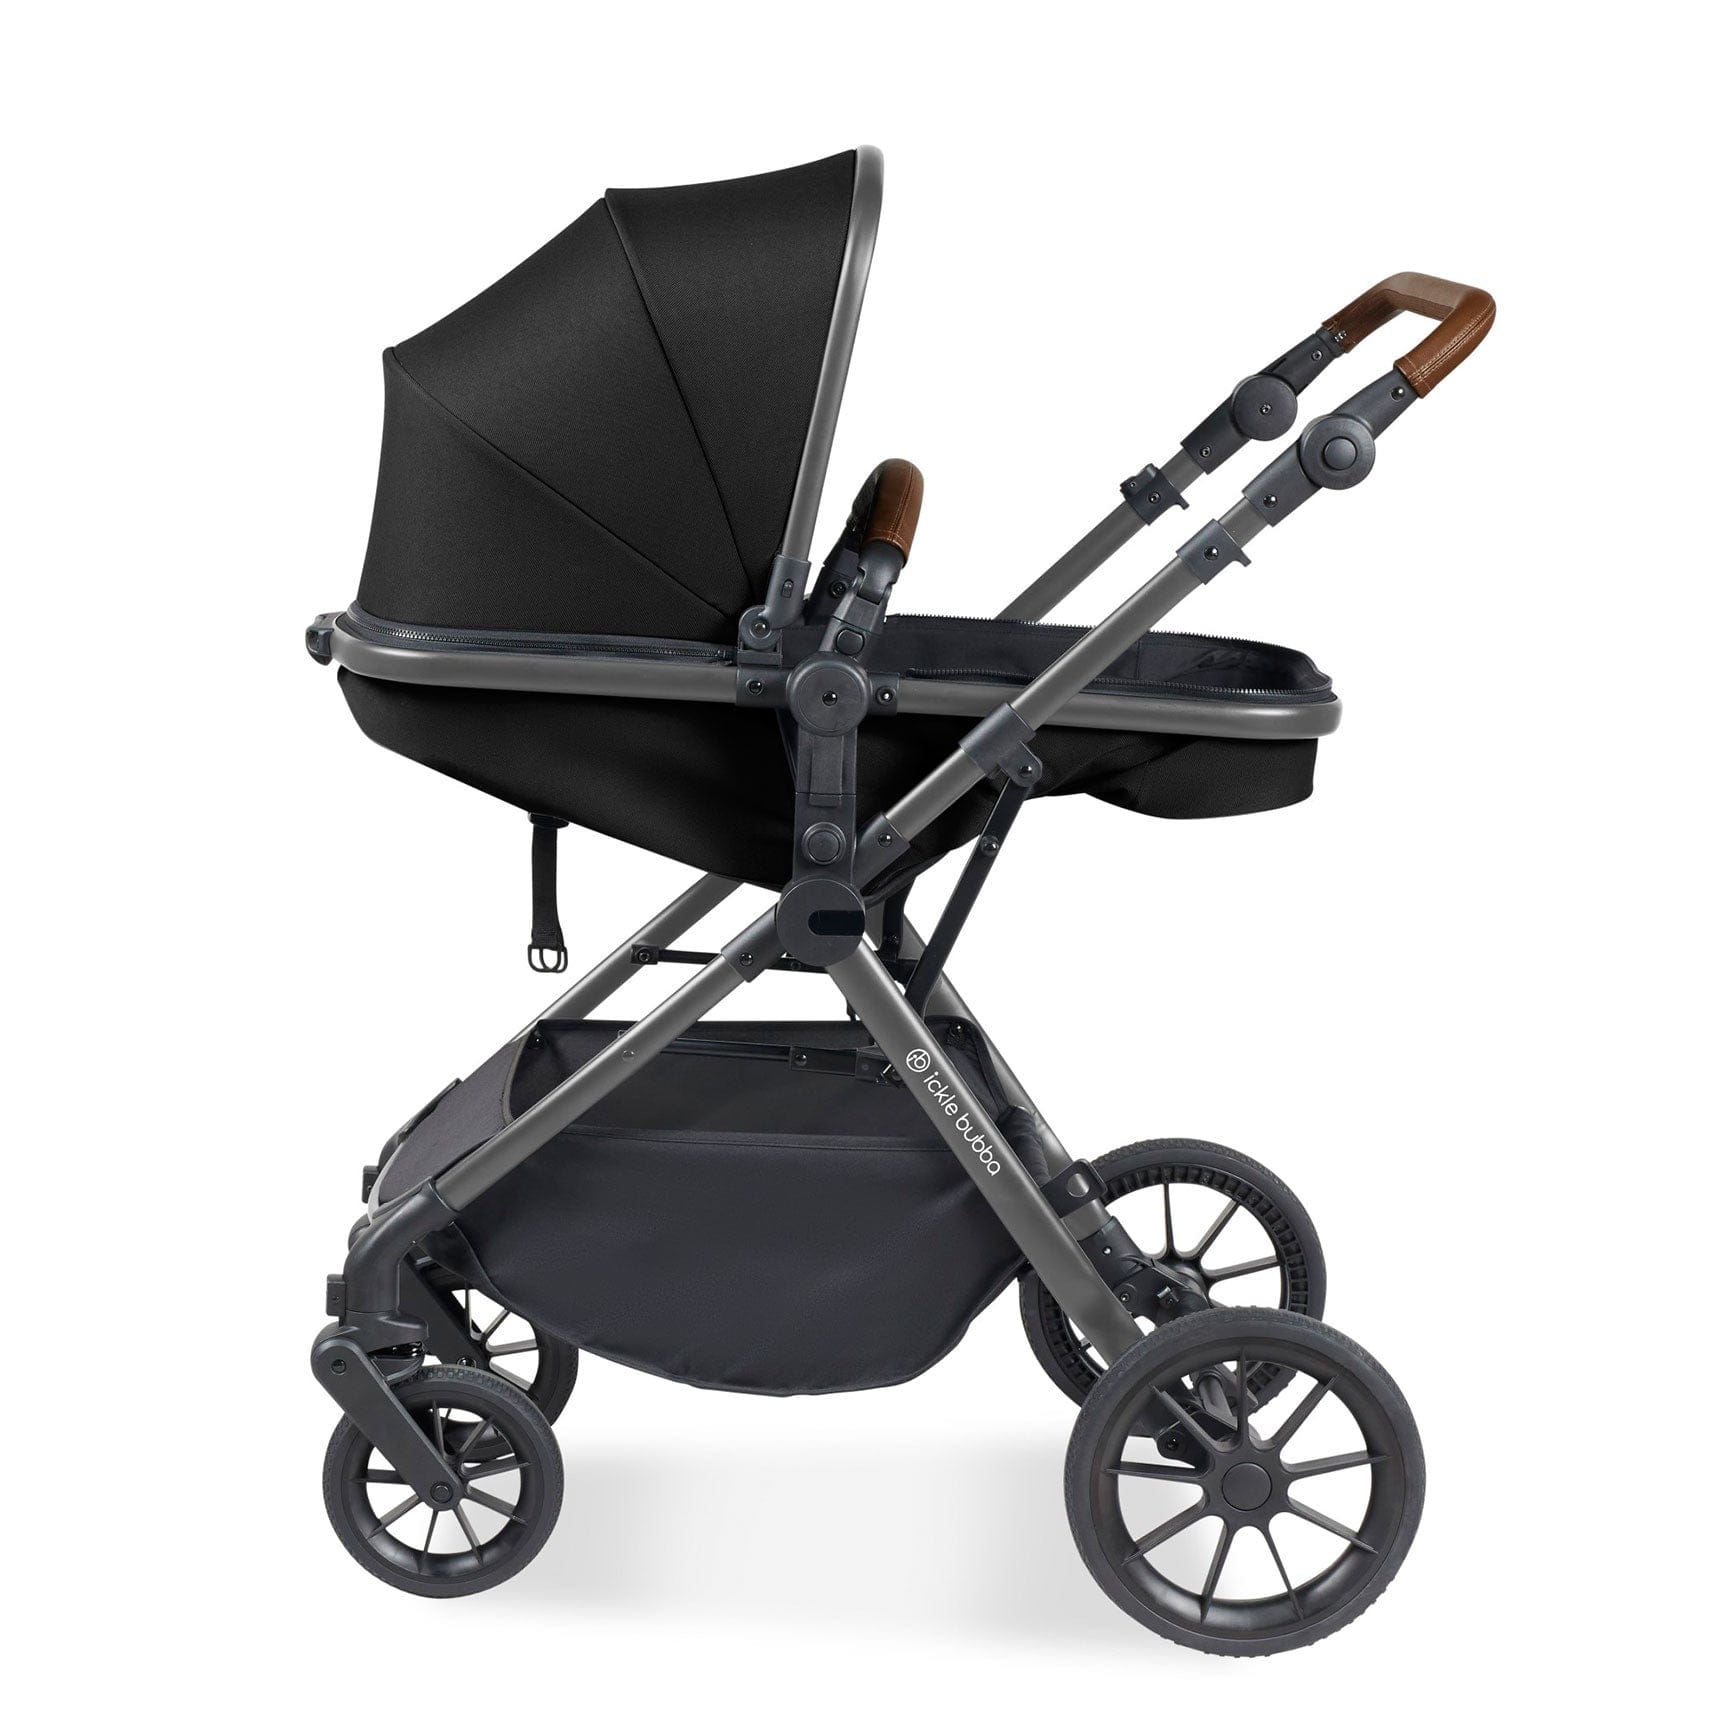 Ickle Bubba Cosmo All-in-One I-Size Travel System with Isofix Base in Black/Gun Metal Travel Systems 10-007-300-135 5056515025835